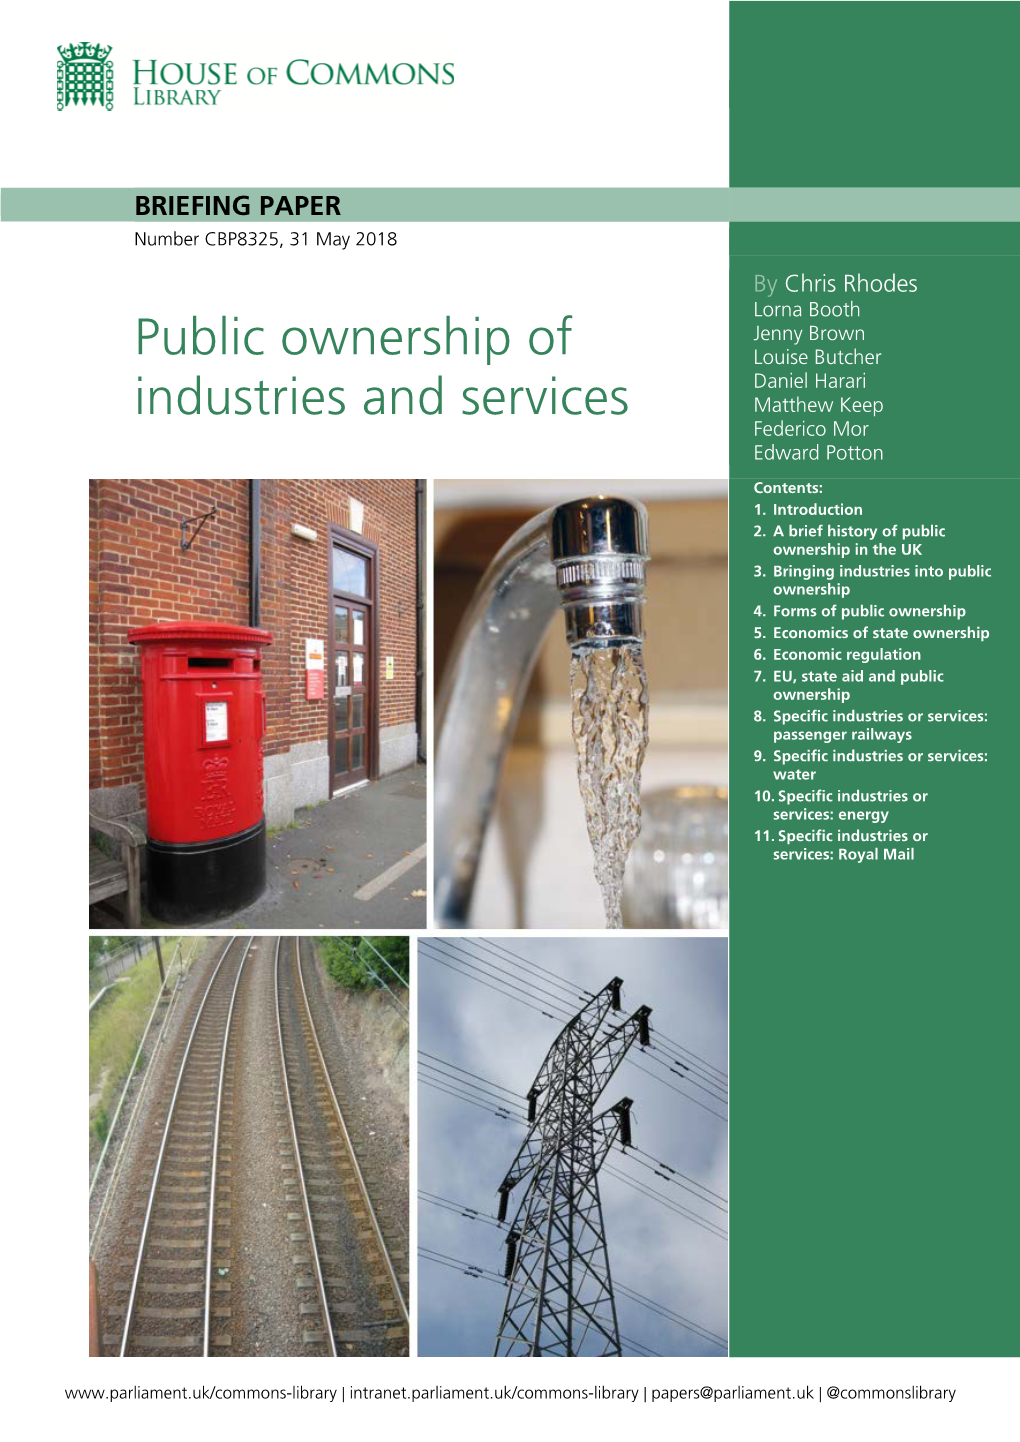 Public Ownership of Industries and Services